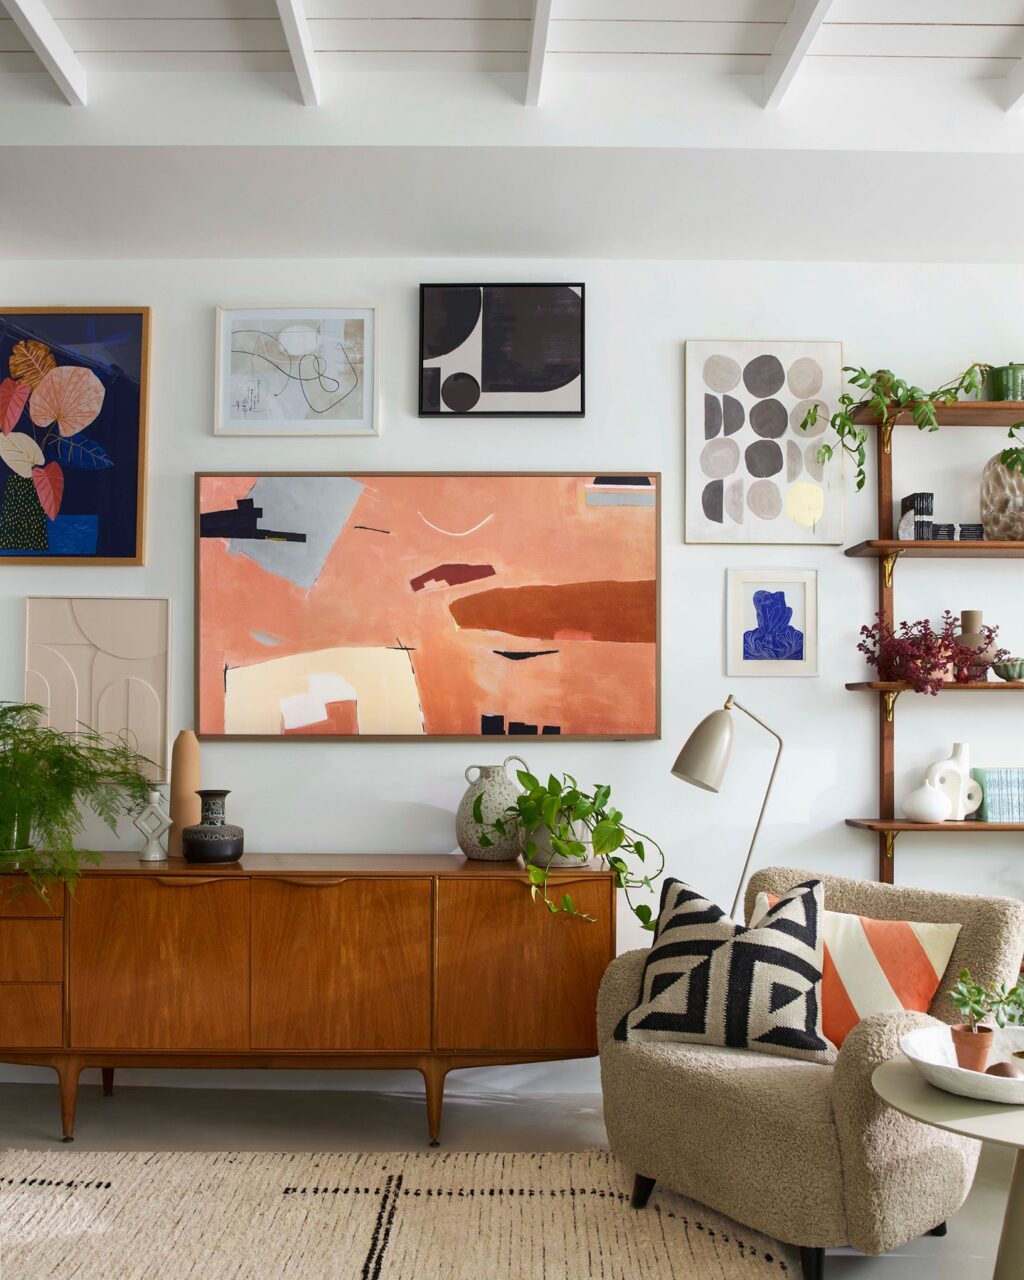 How do you add personality to a room?
